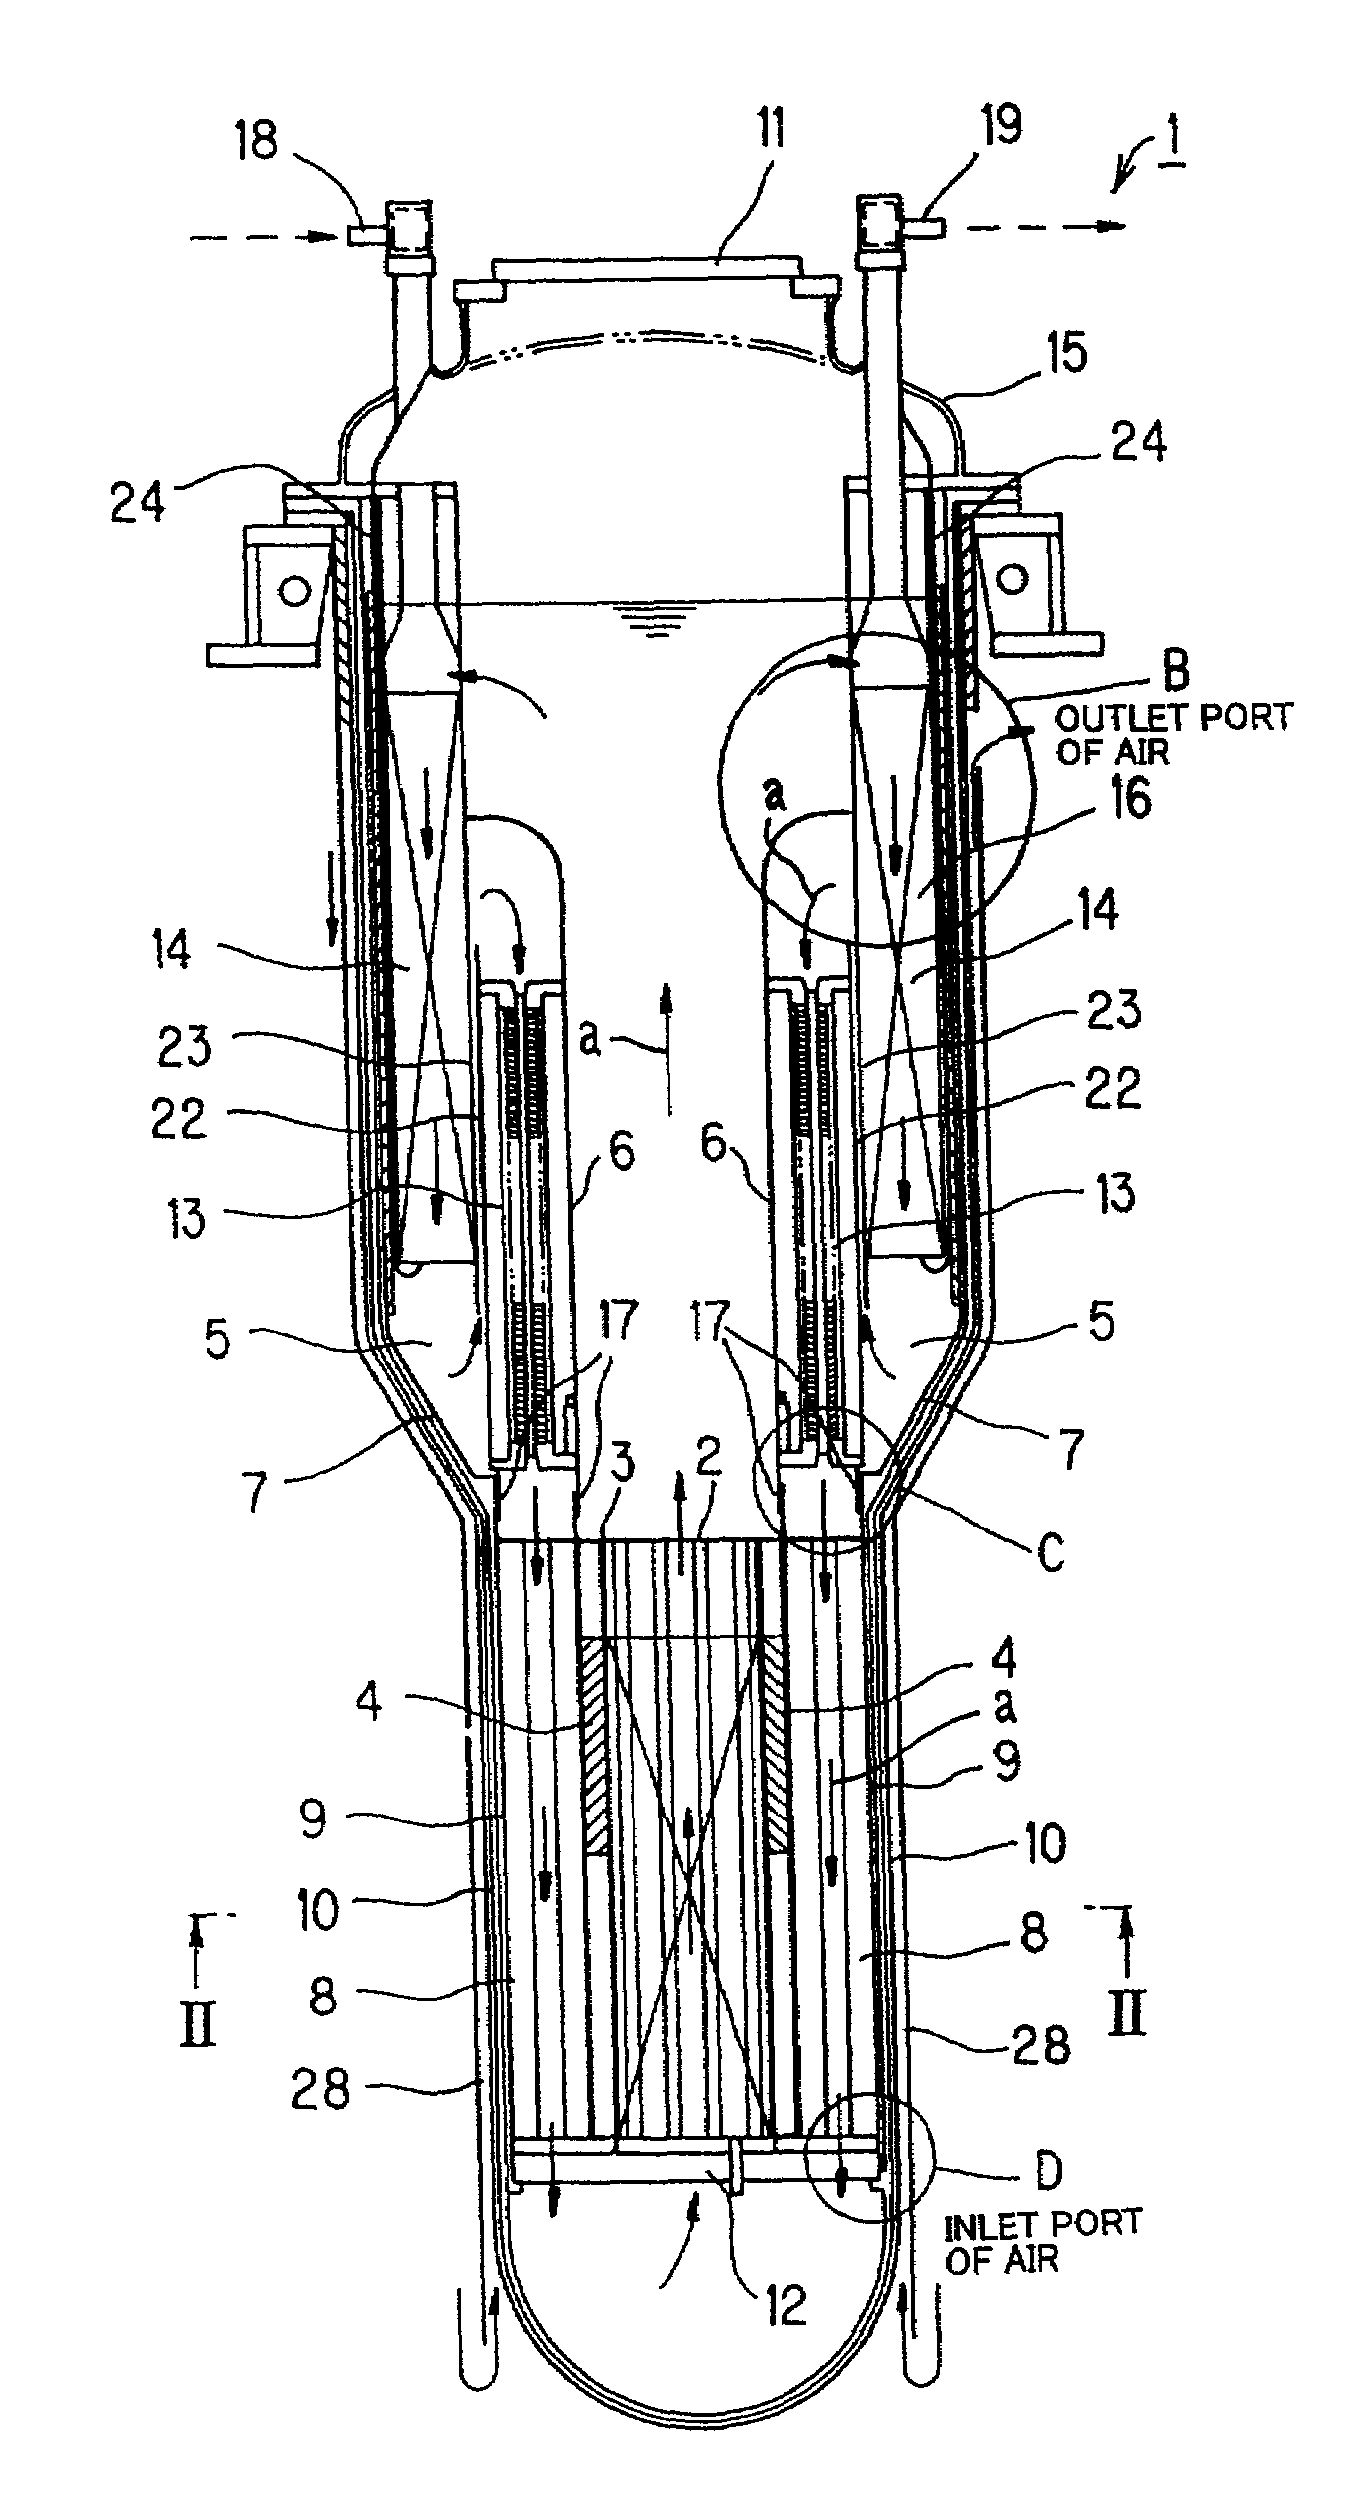 Reactivity control rod for core